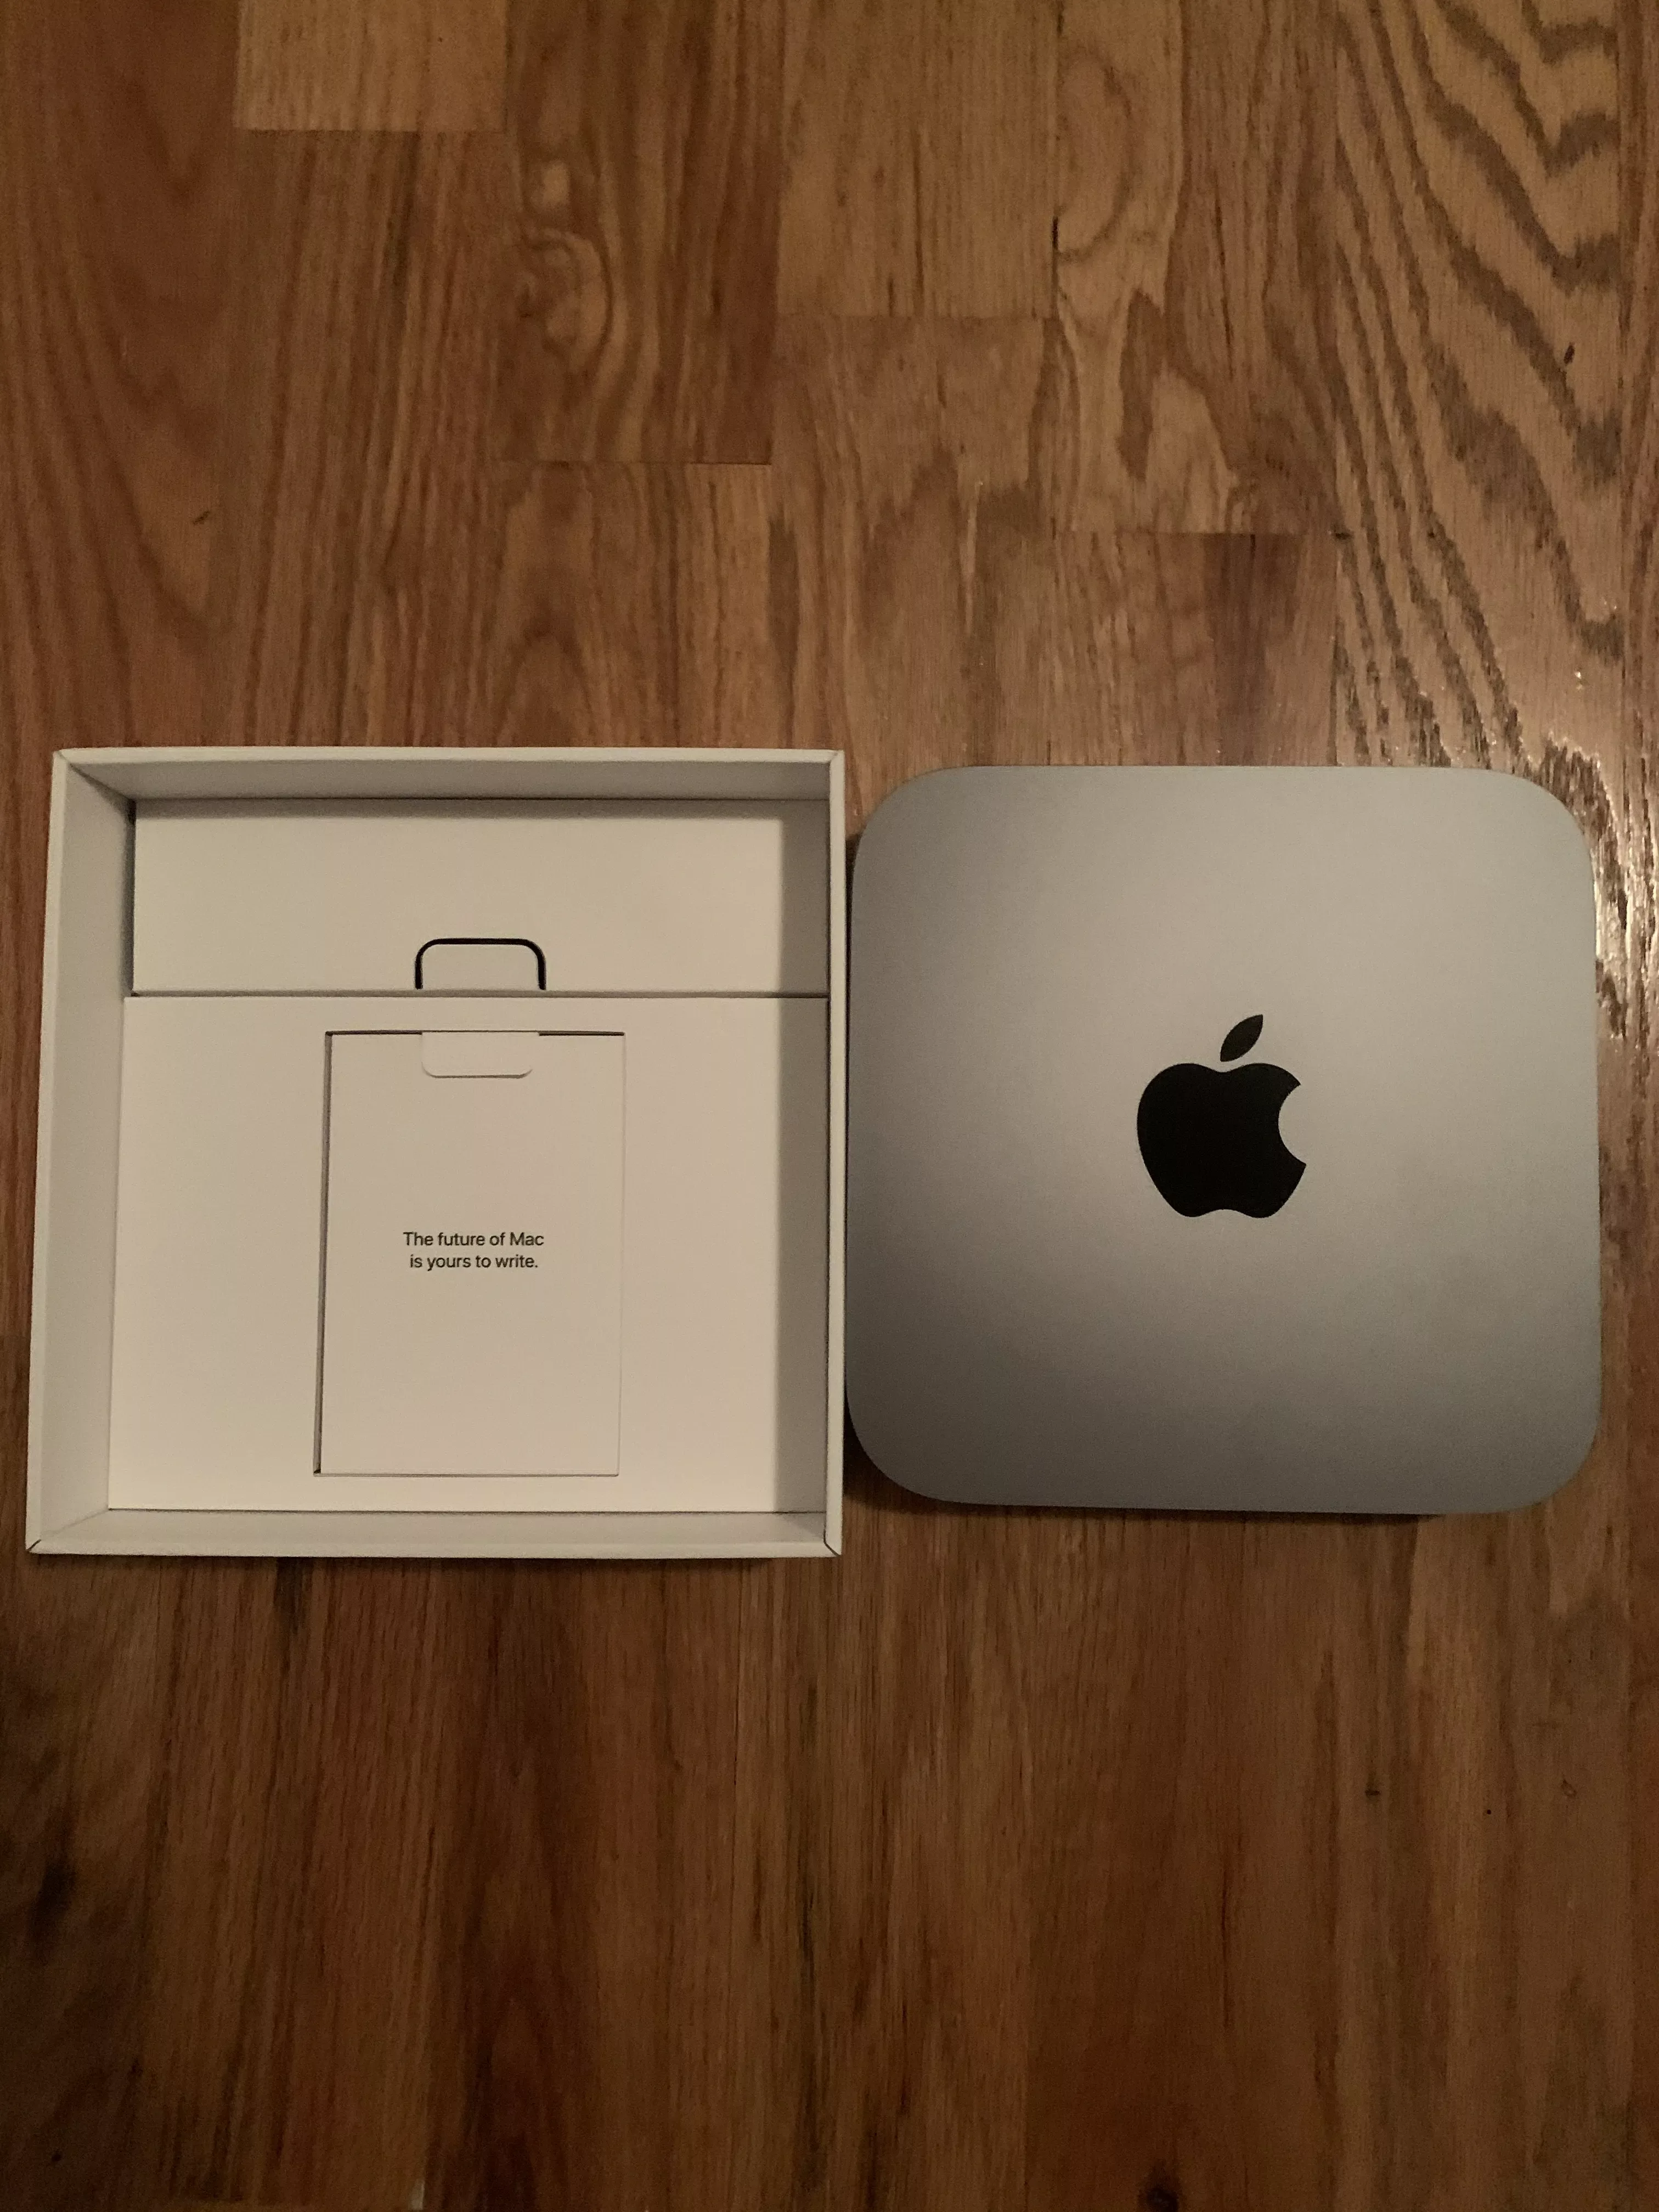 A photo of the Apple Silicon computer Developer Transition Kit that was sent to Oscar, inviting him to Write the Future of Mac.